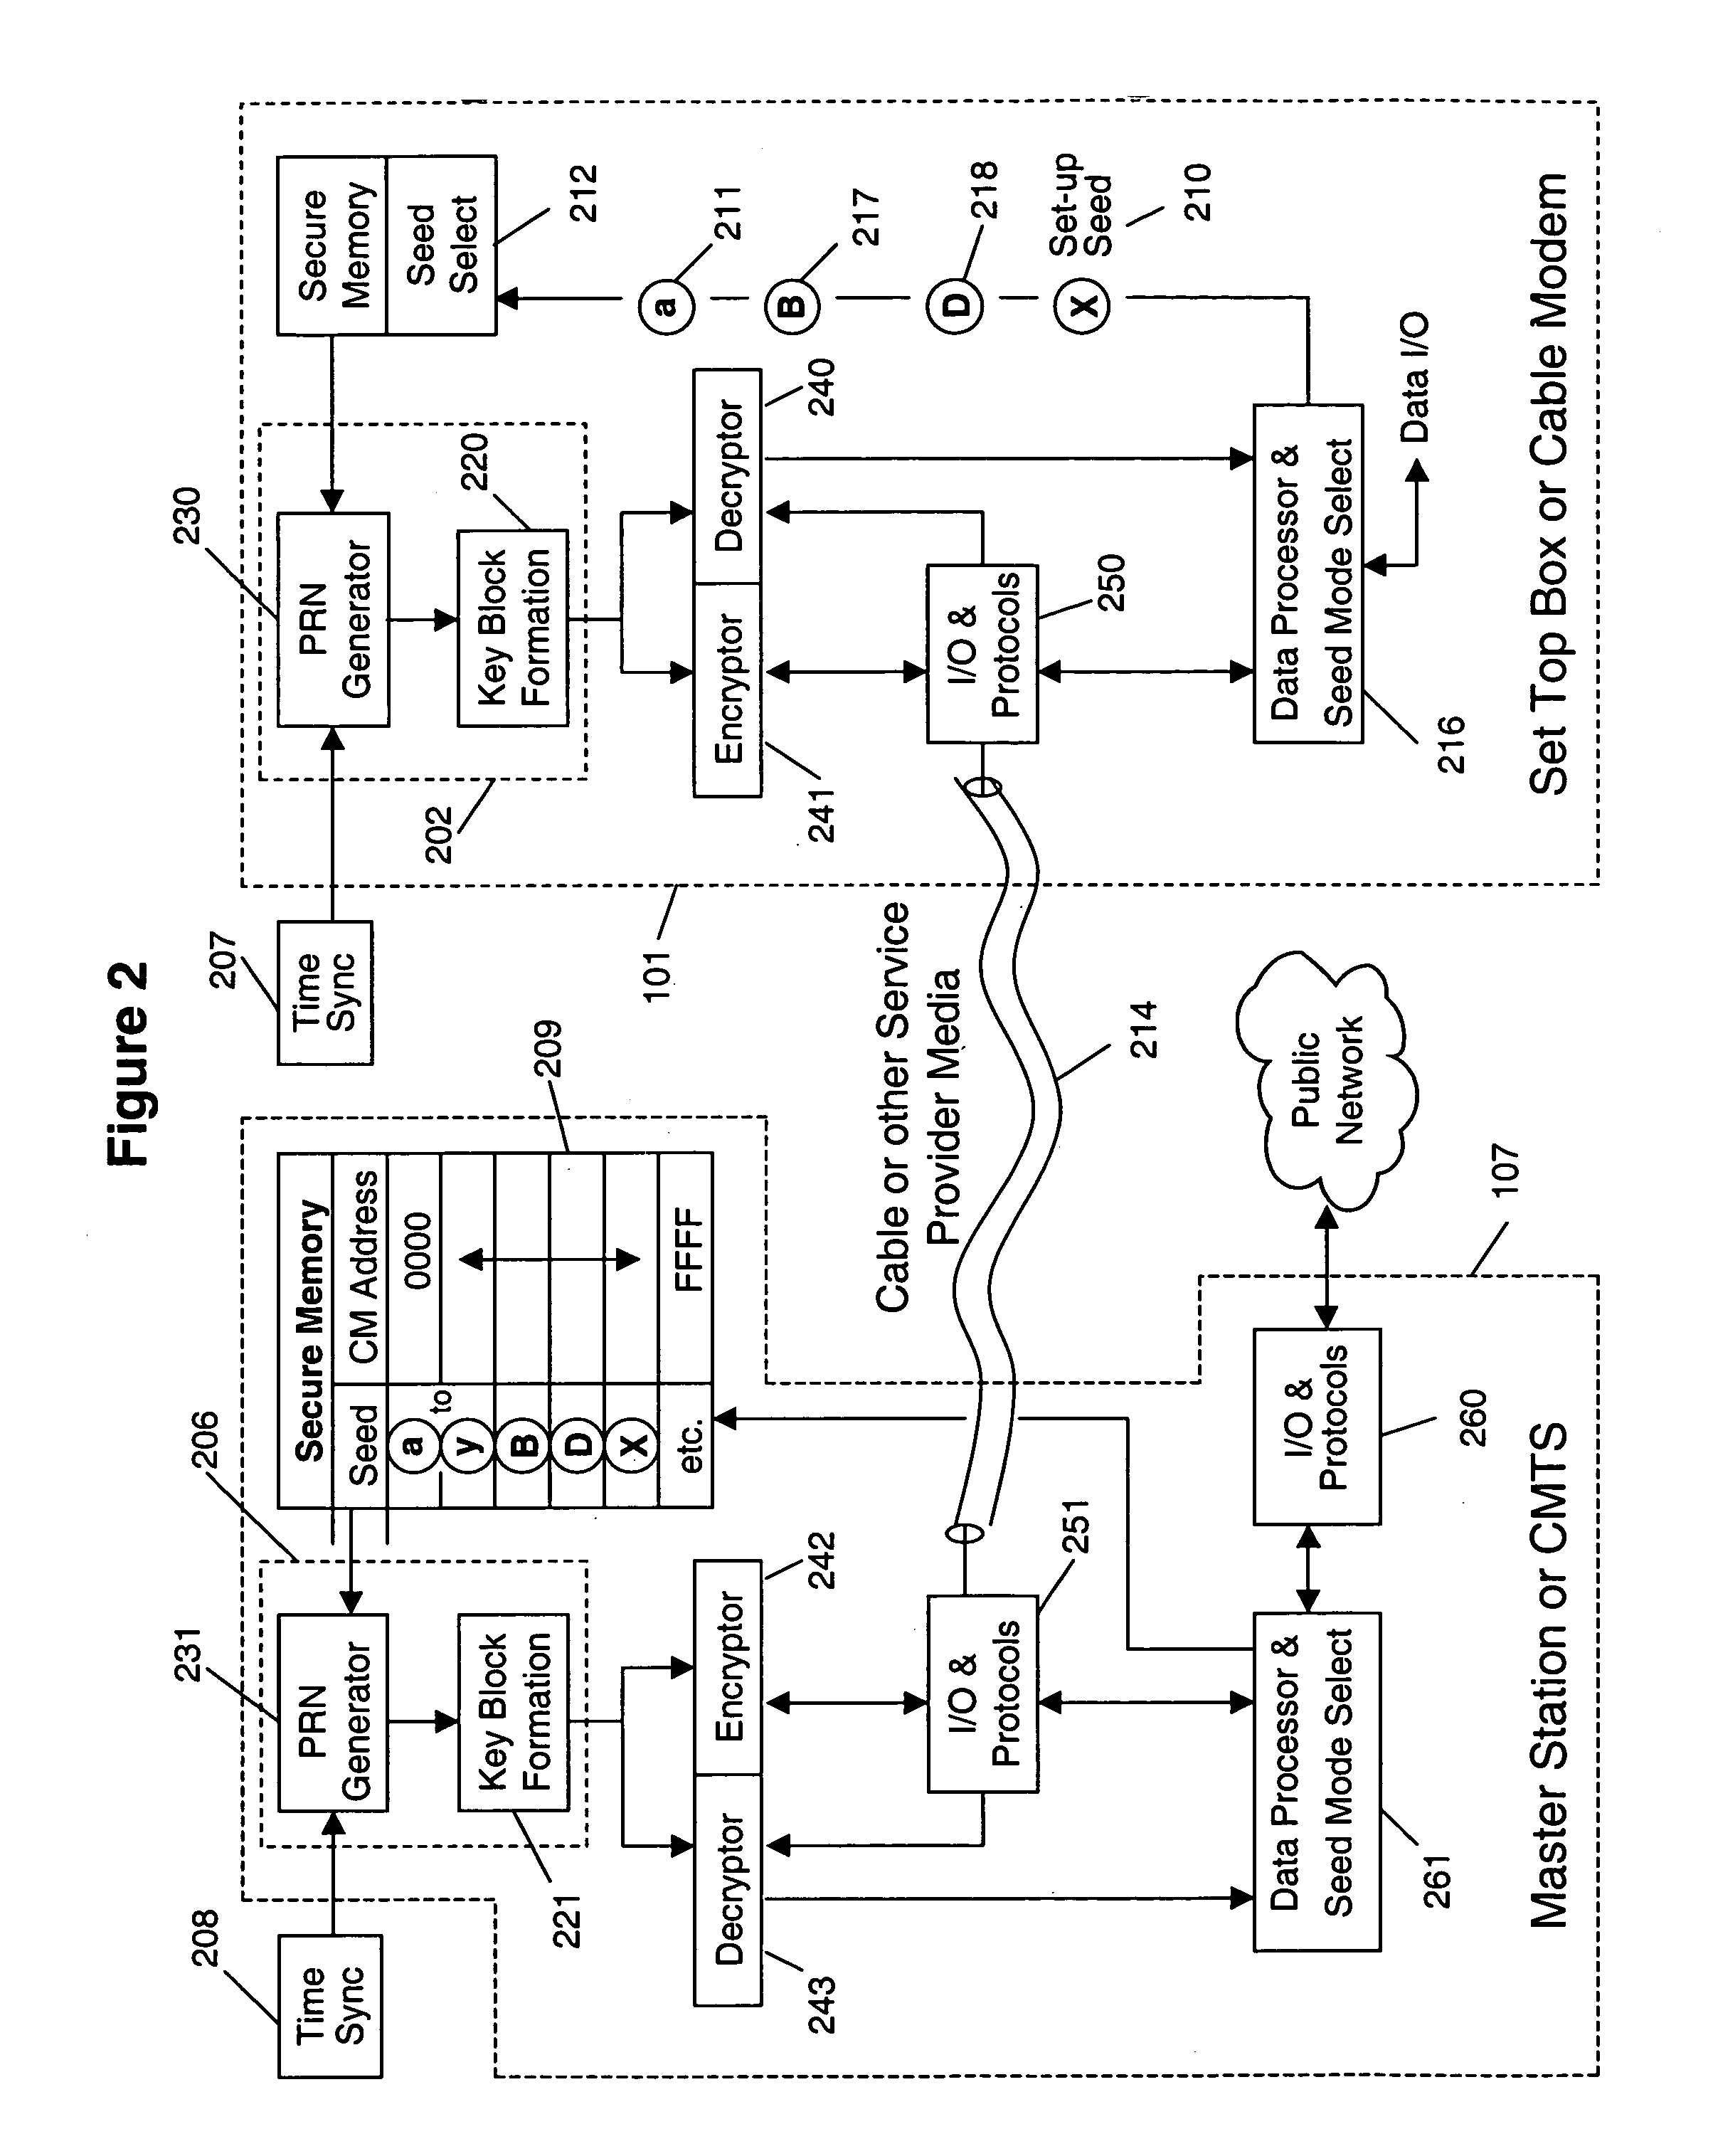 Cryptographic communications using in situ generated cryptographic keys for conditional access